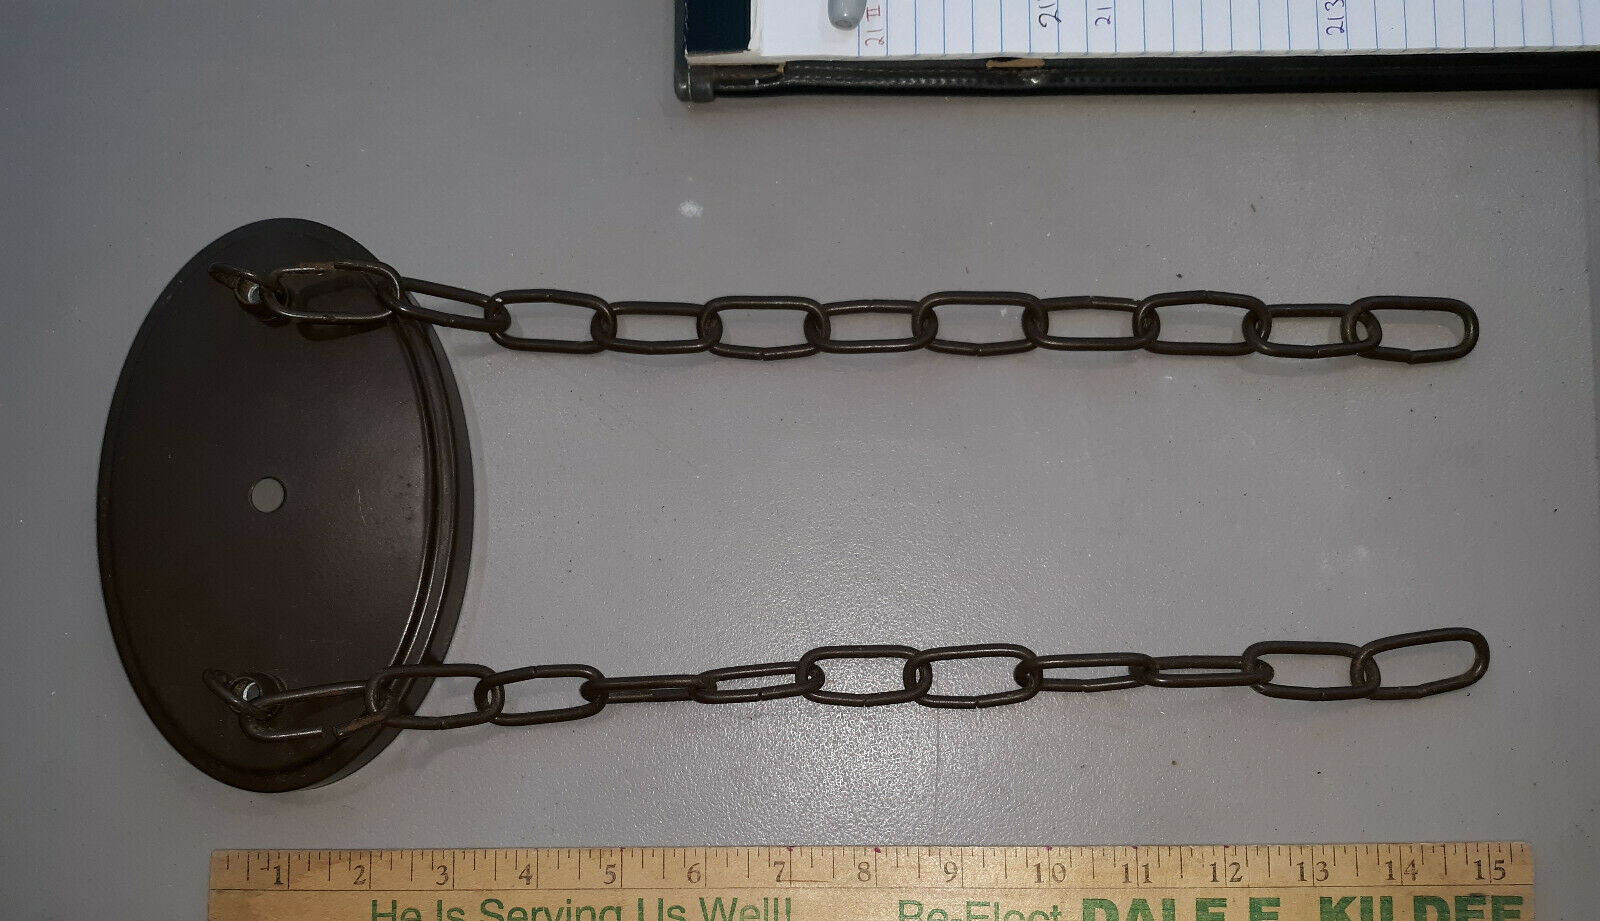 Primary image for 21II54 CHANDELIER DROP: OVAL BROWN ESCUTCHEON, 7" X 4-1/2", WITH DUAL 15" CHAINS